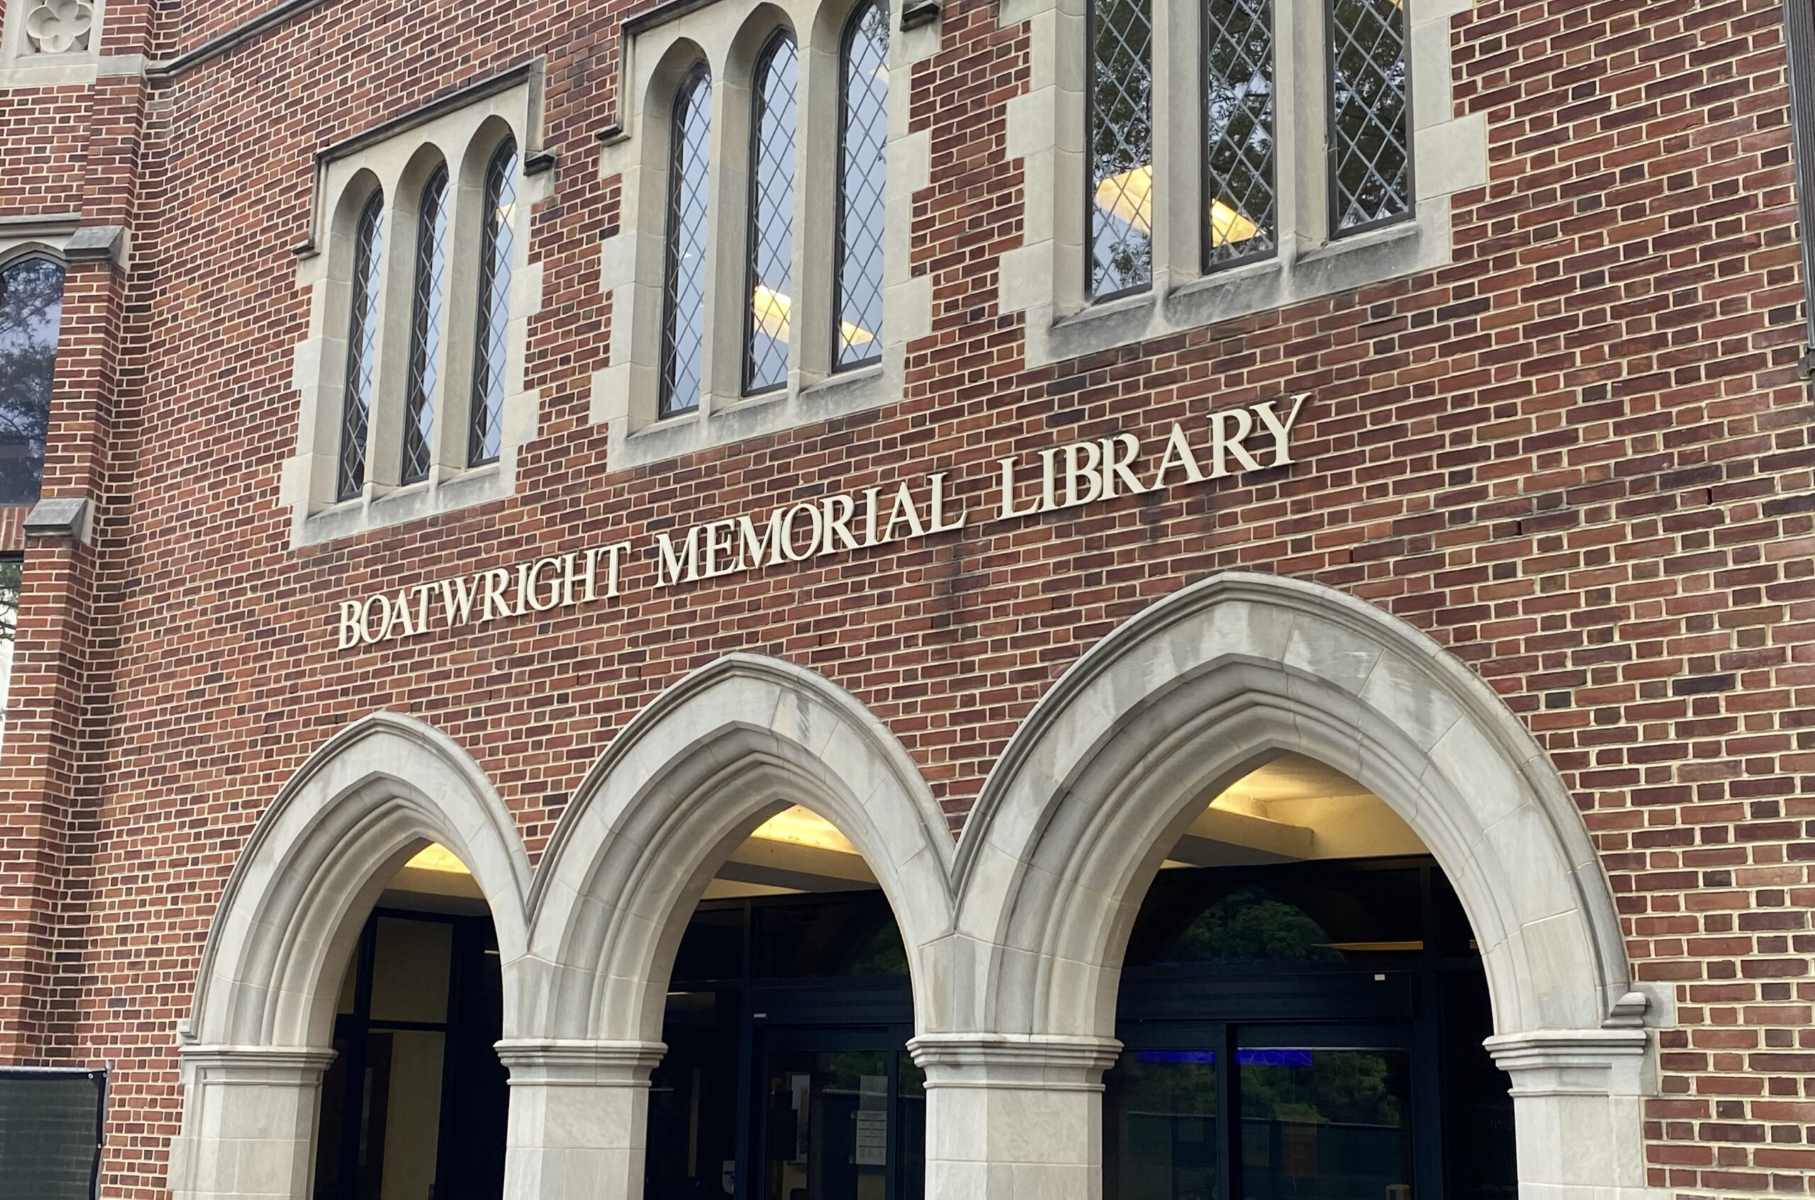 16-astonishing-facts-about-boatwright-memorial-library